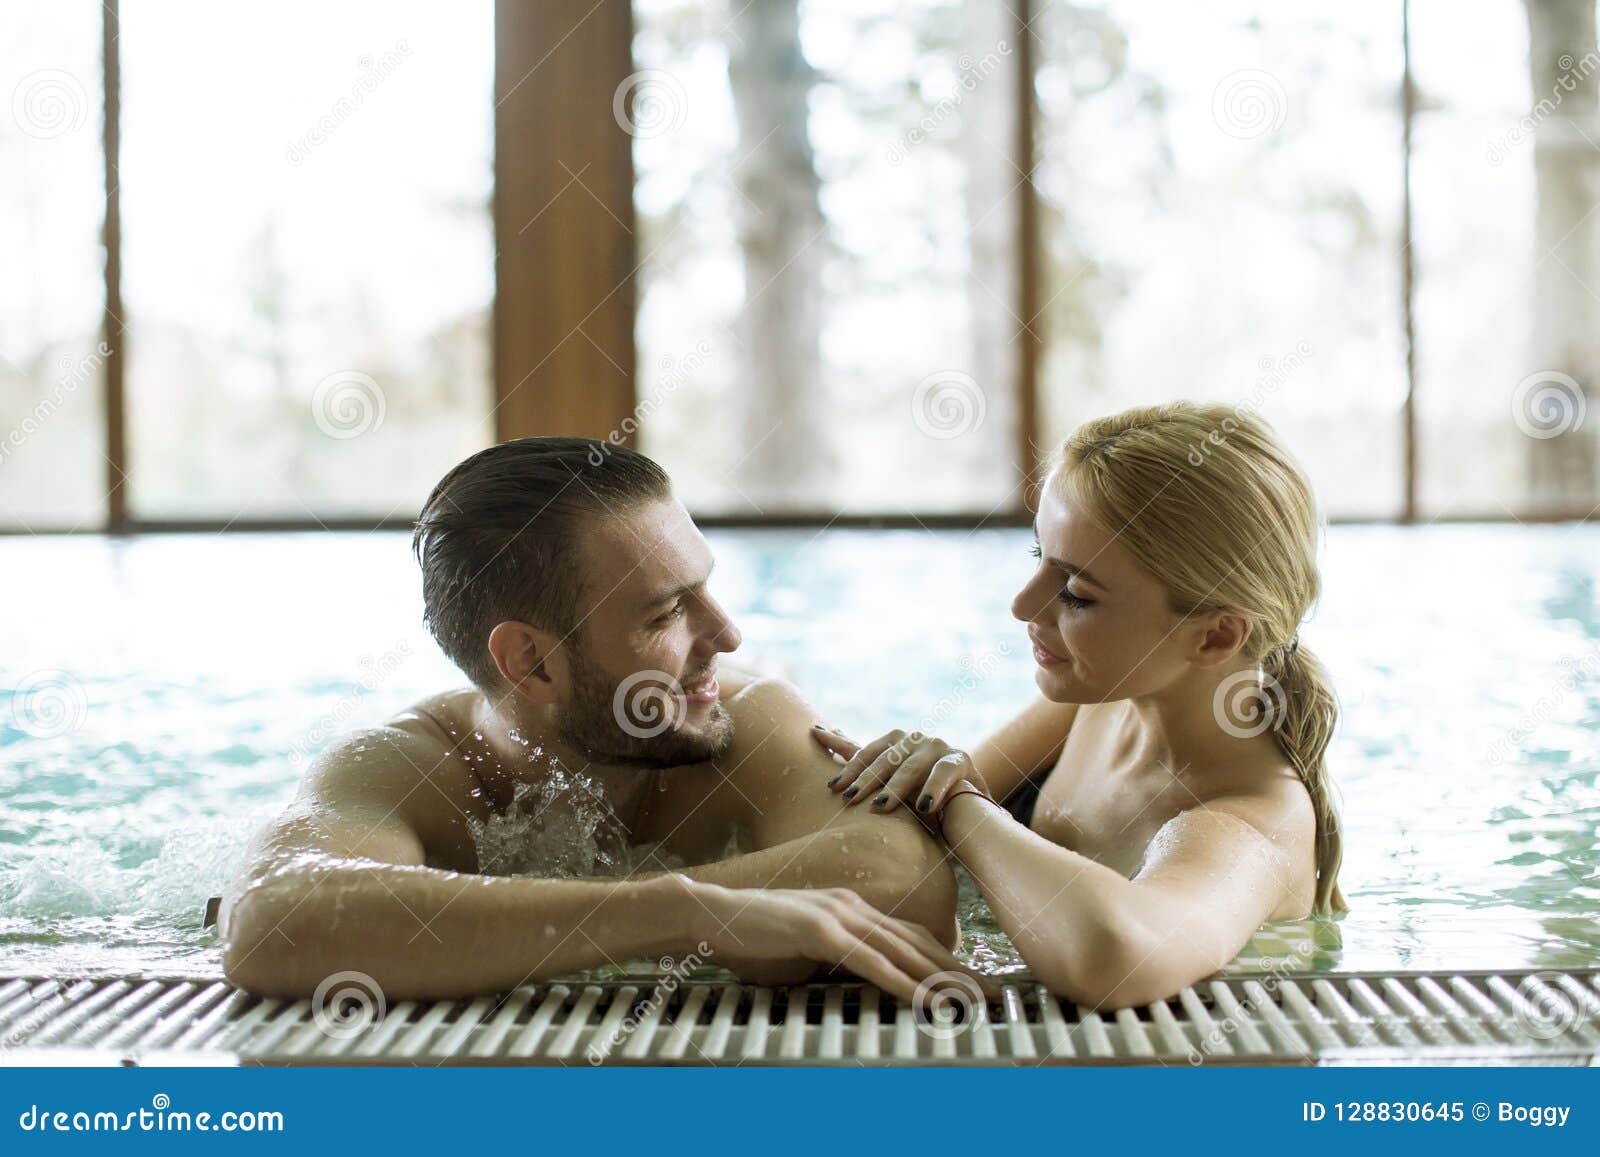 Loving Couple Relaxing In Hot Tub Stock Image Image Of Leisure